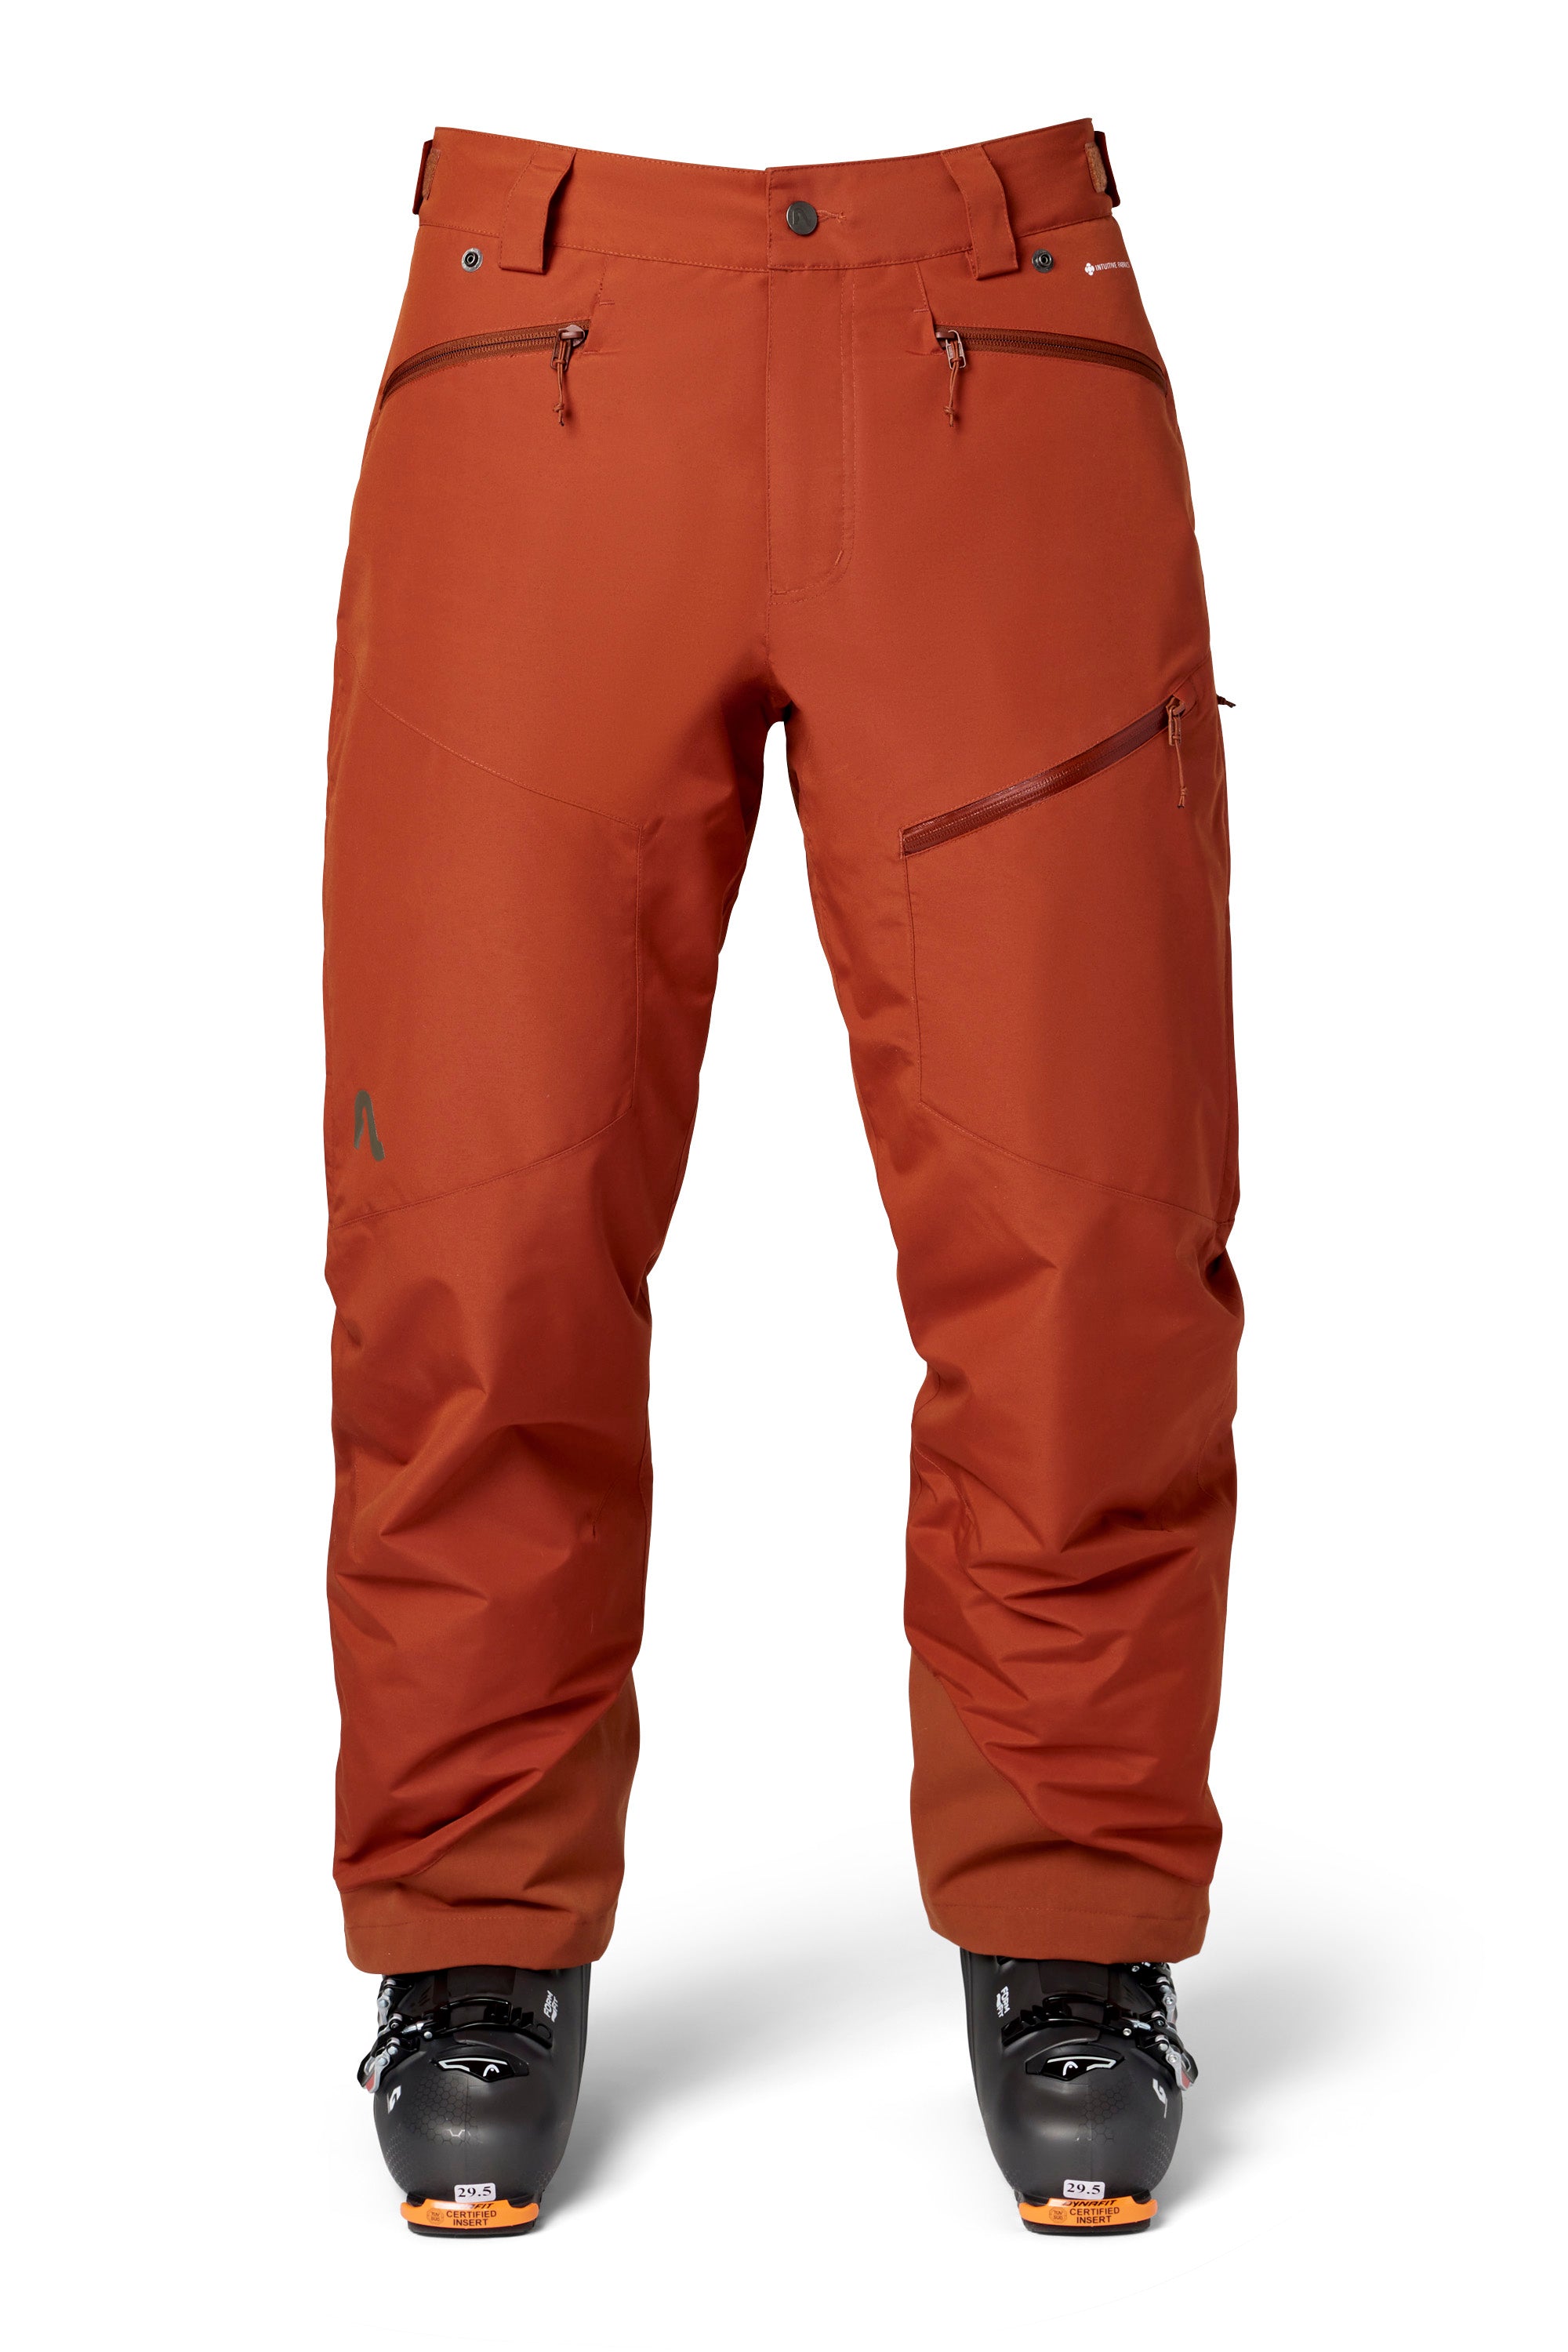 2022 Snowman Insulated Pant - Now On Sale | Flylow – Flylow Gear